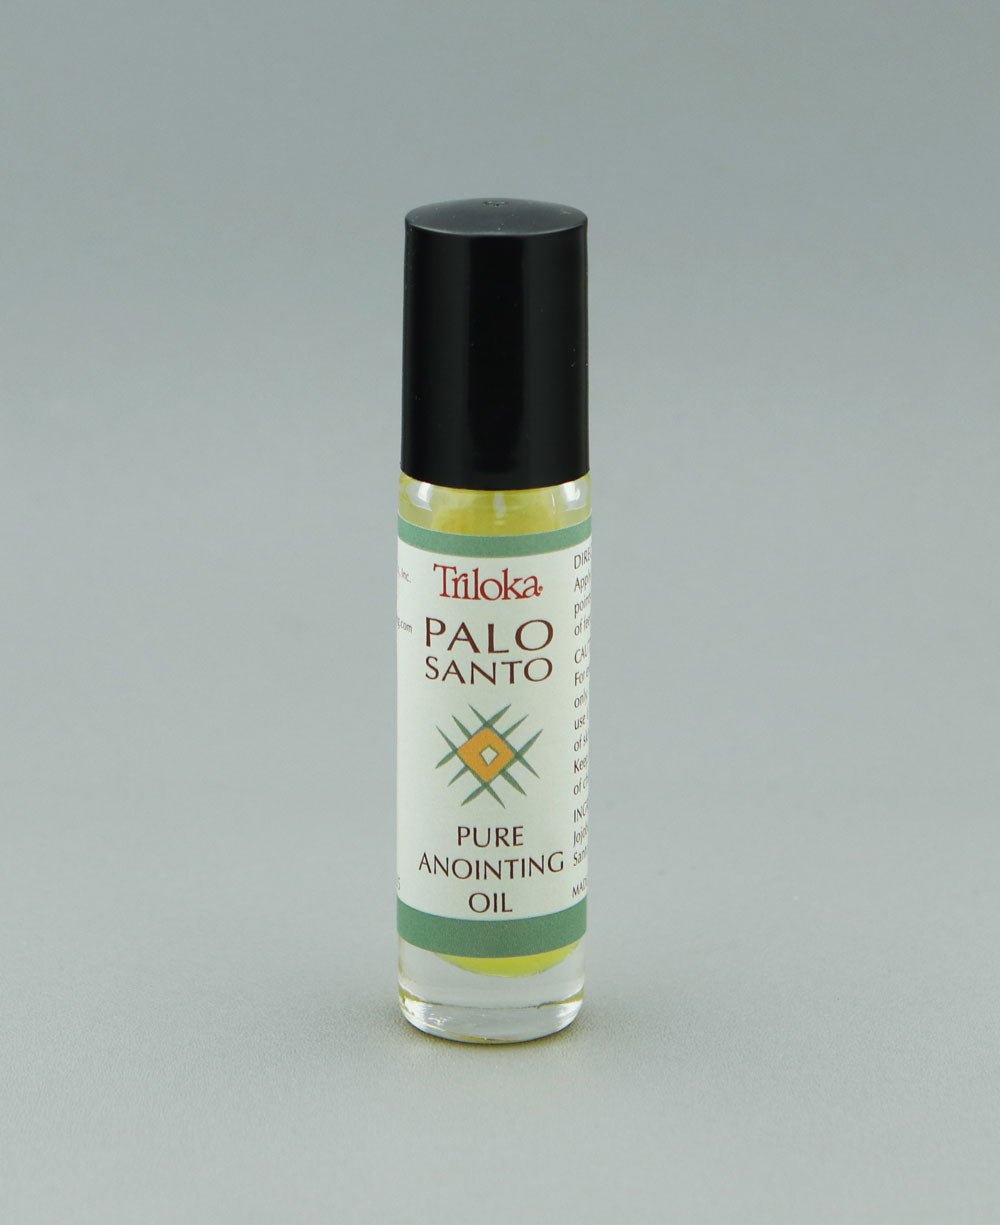 Palo Santo Essential Oil Anointing Roll-On - Perfume Oil